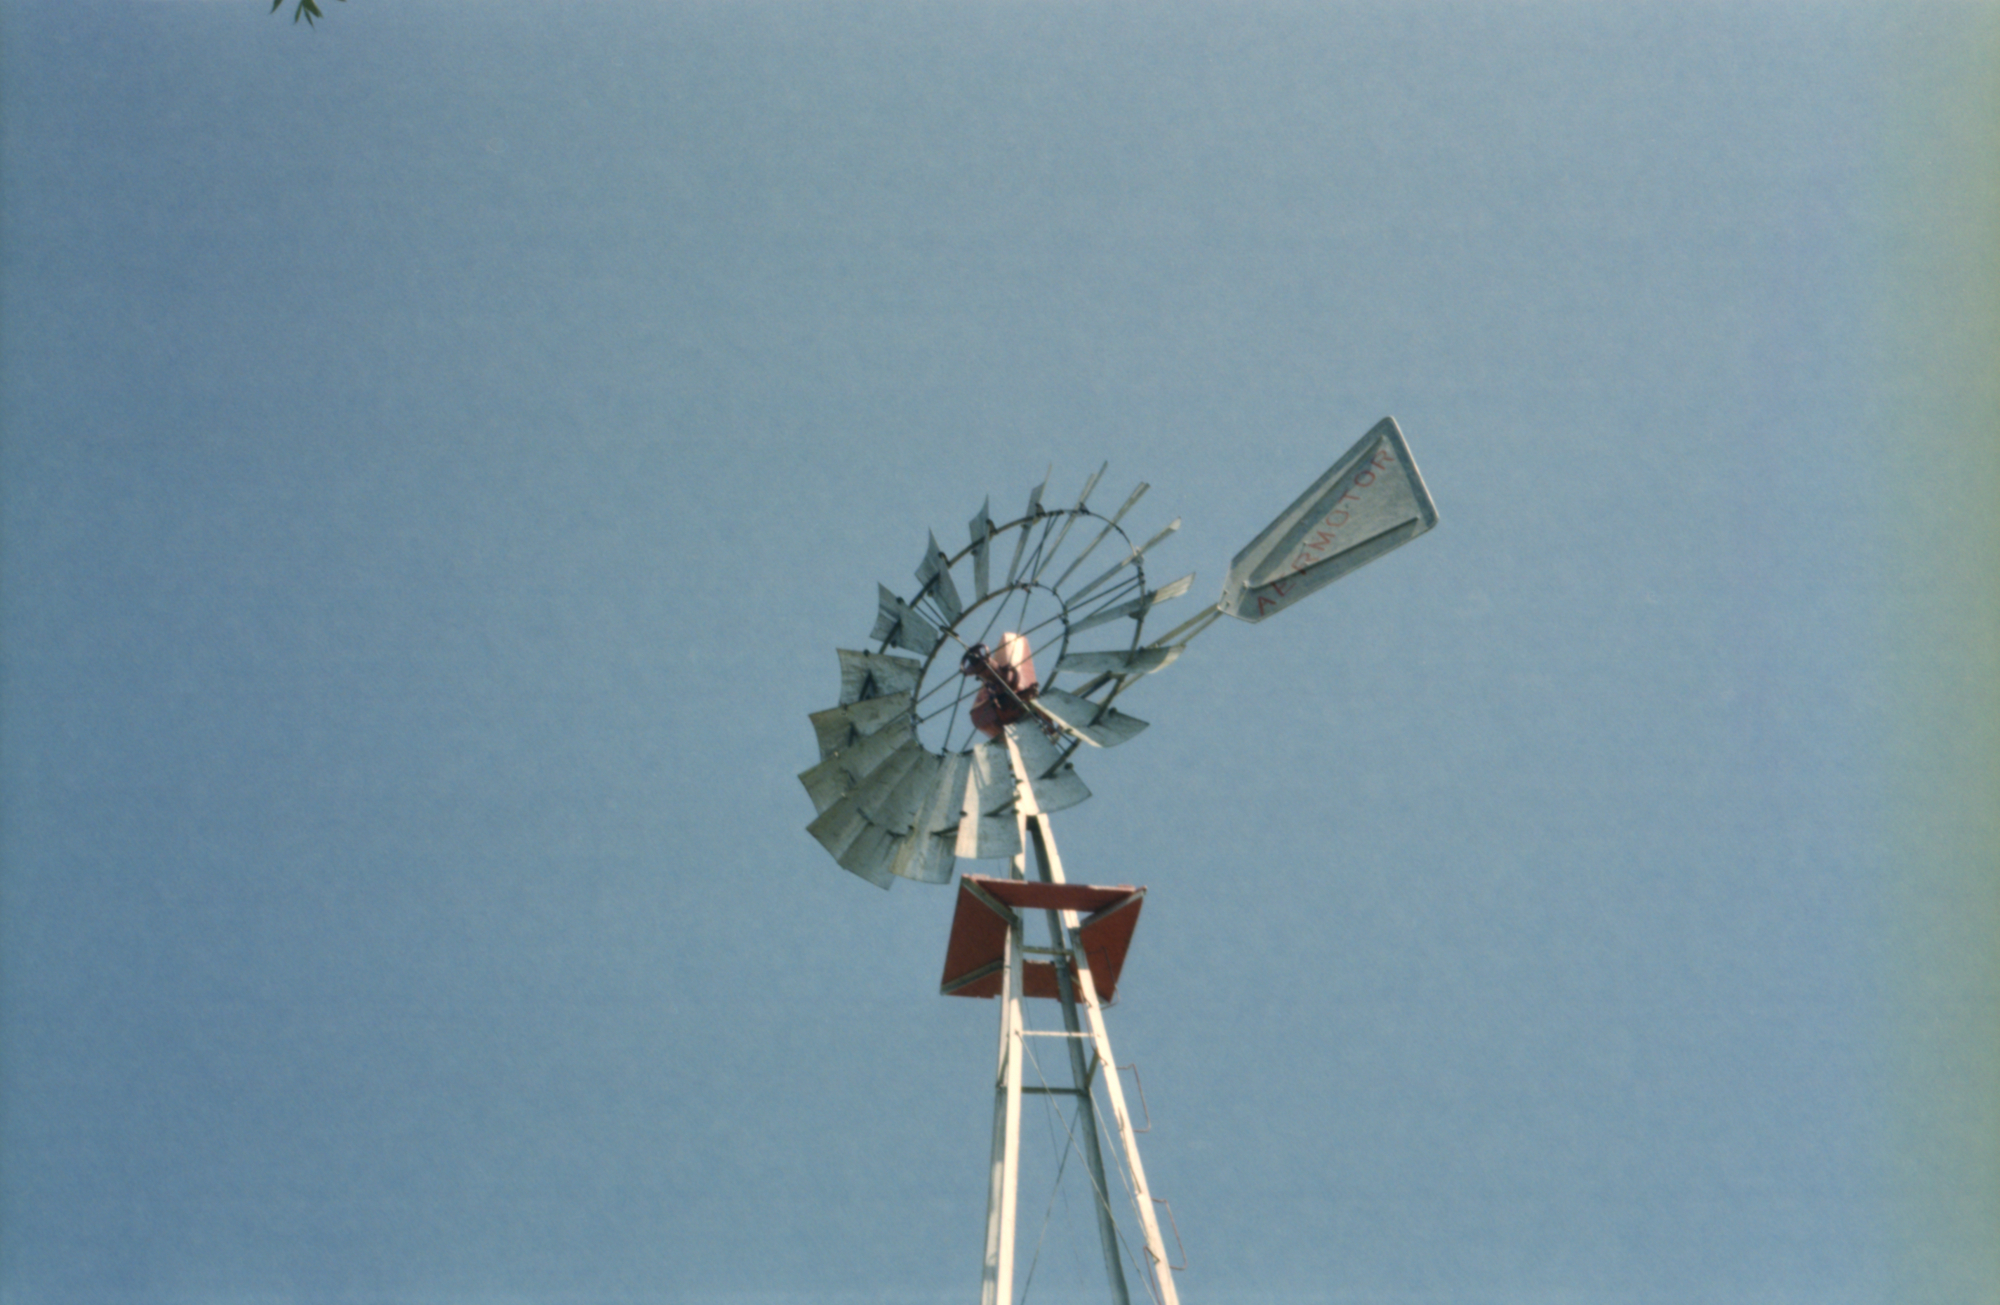 Colour photo of a wind turbine against a blue summer sky. The wind turbine has white blades and a red platform. The lettering AERMOTOR can be seen on the wind vane. The right edge of the photo is slightly yellowish in colour.